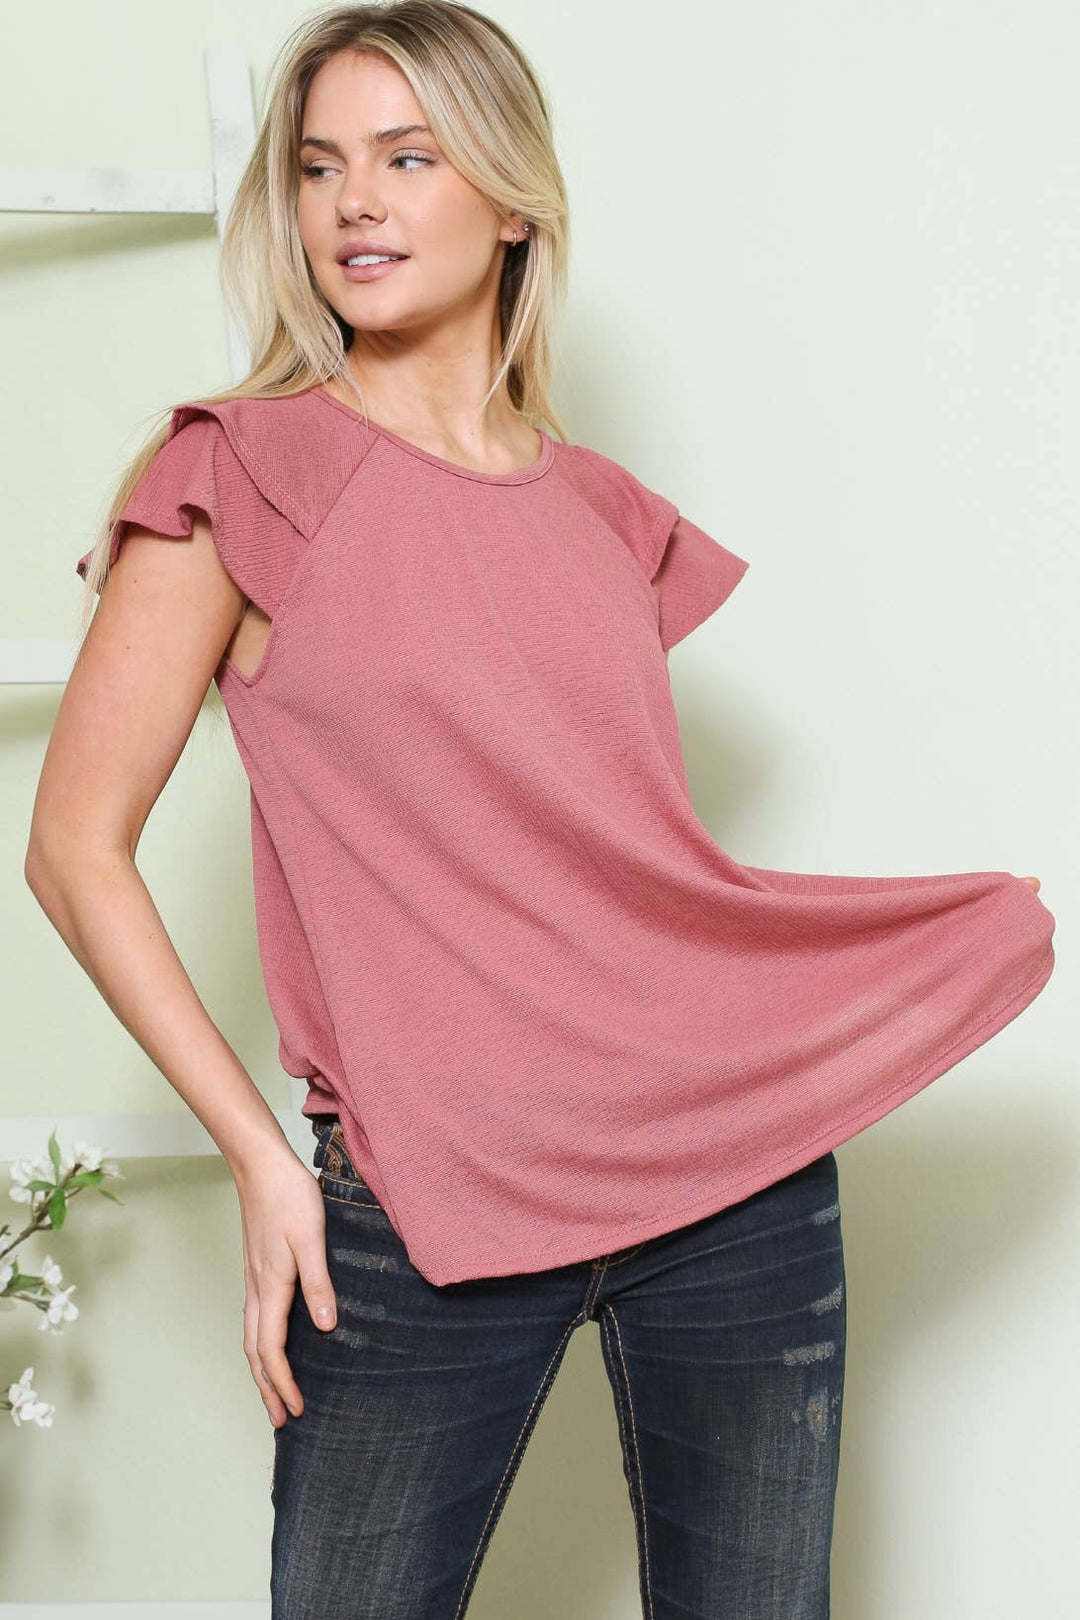 Viva Ruffle Short Sleeve Top, Pink-Short Sleeve Tops-Inspired by Justeen-Women's Clothing Boutique in Chicago, Illinois